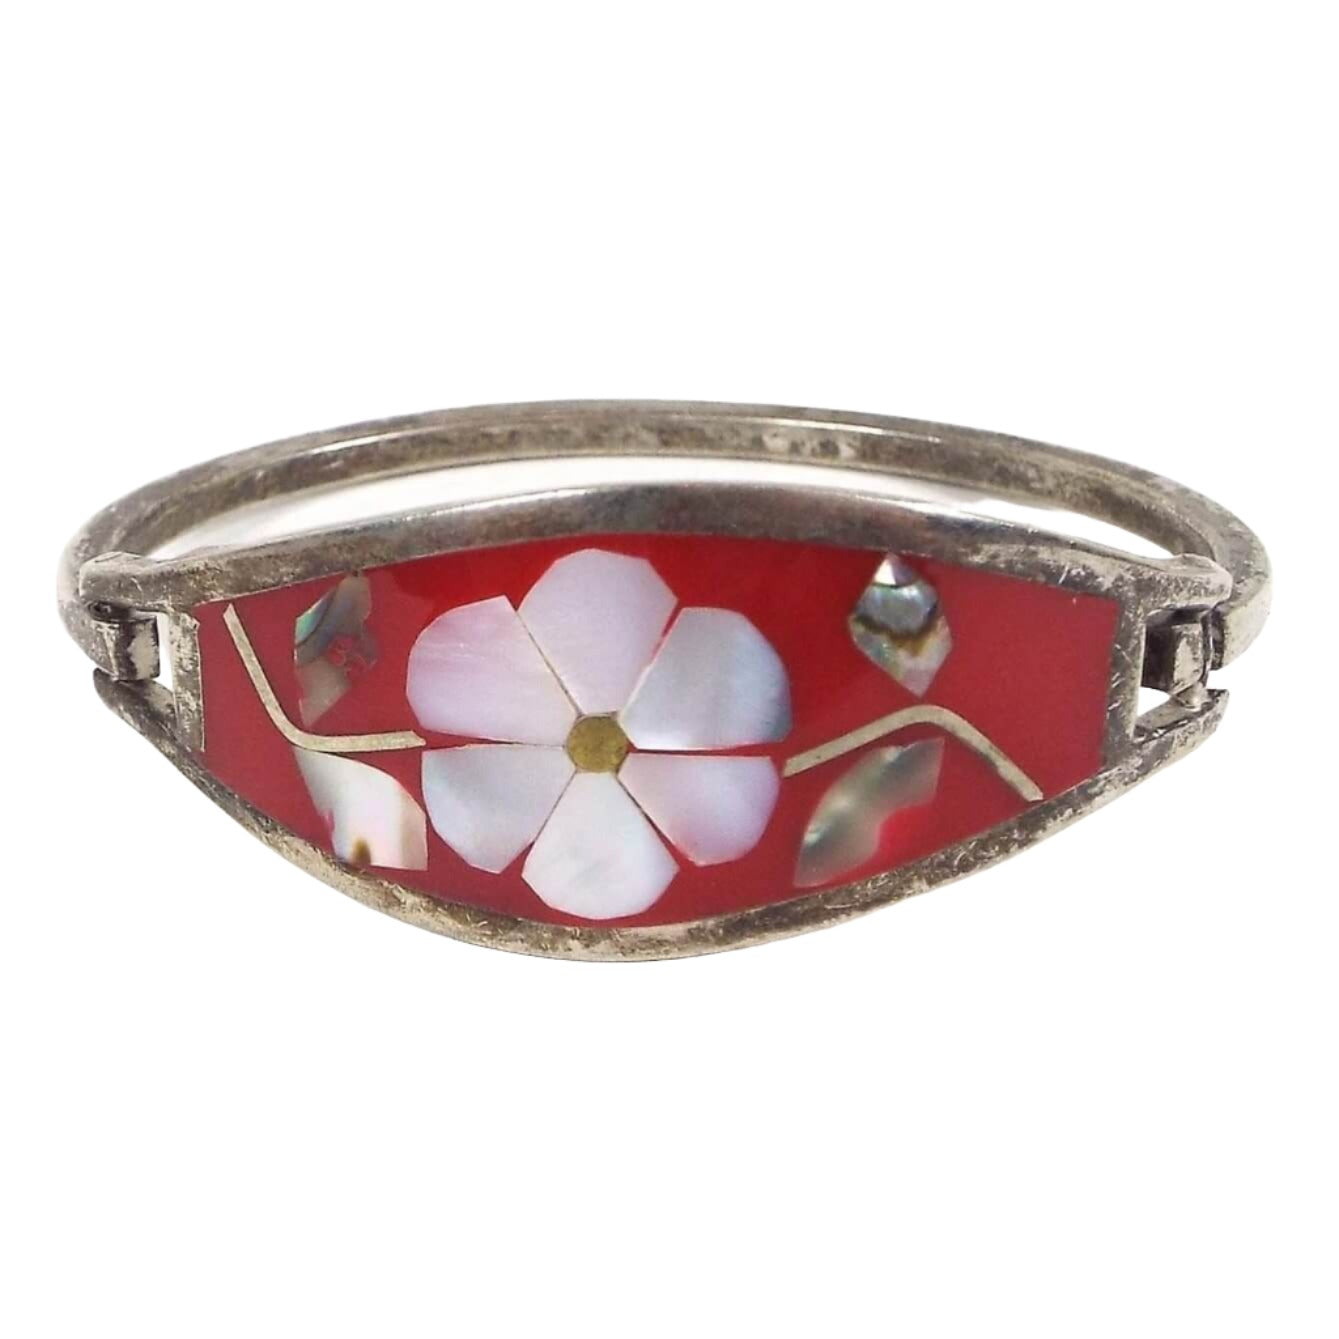 Front view of the Mexican Alpaca hinged bangle has two bands of metal and a large area in the middle with tapered ends. It has red resin with a flower design in the middle.Flower petals are mother of pearl shell and pearly white in color. Leaves on each side of the flower are abalone shell and are pearly multi color. There is a thin band of metal curved around the back and one side has a hook that clicks onto one side of the bangle to take it on and off. Metal is a darkened silver color from age.